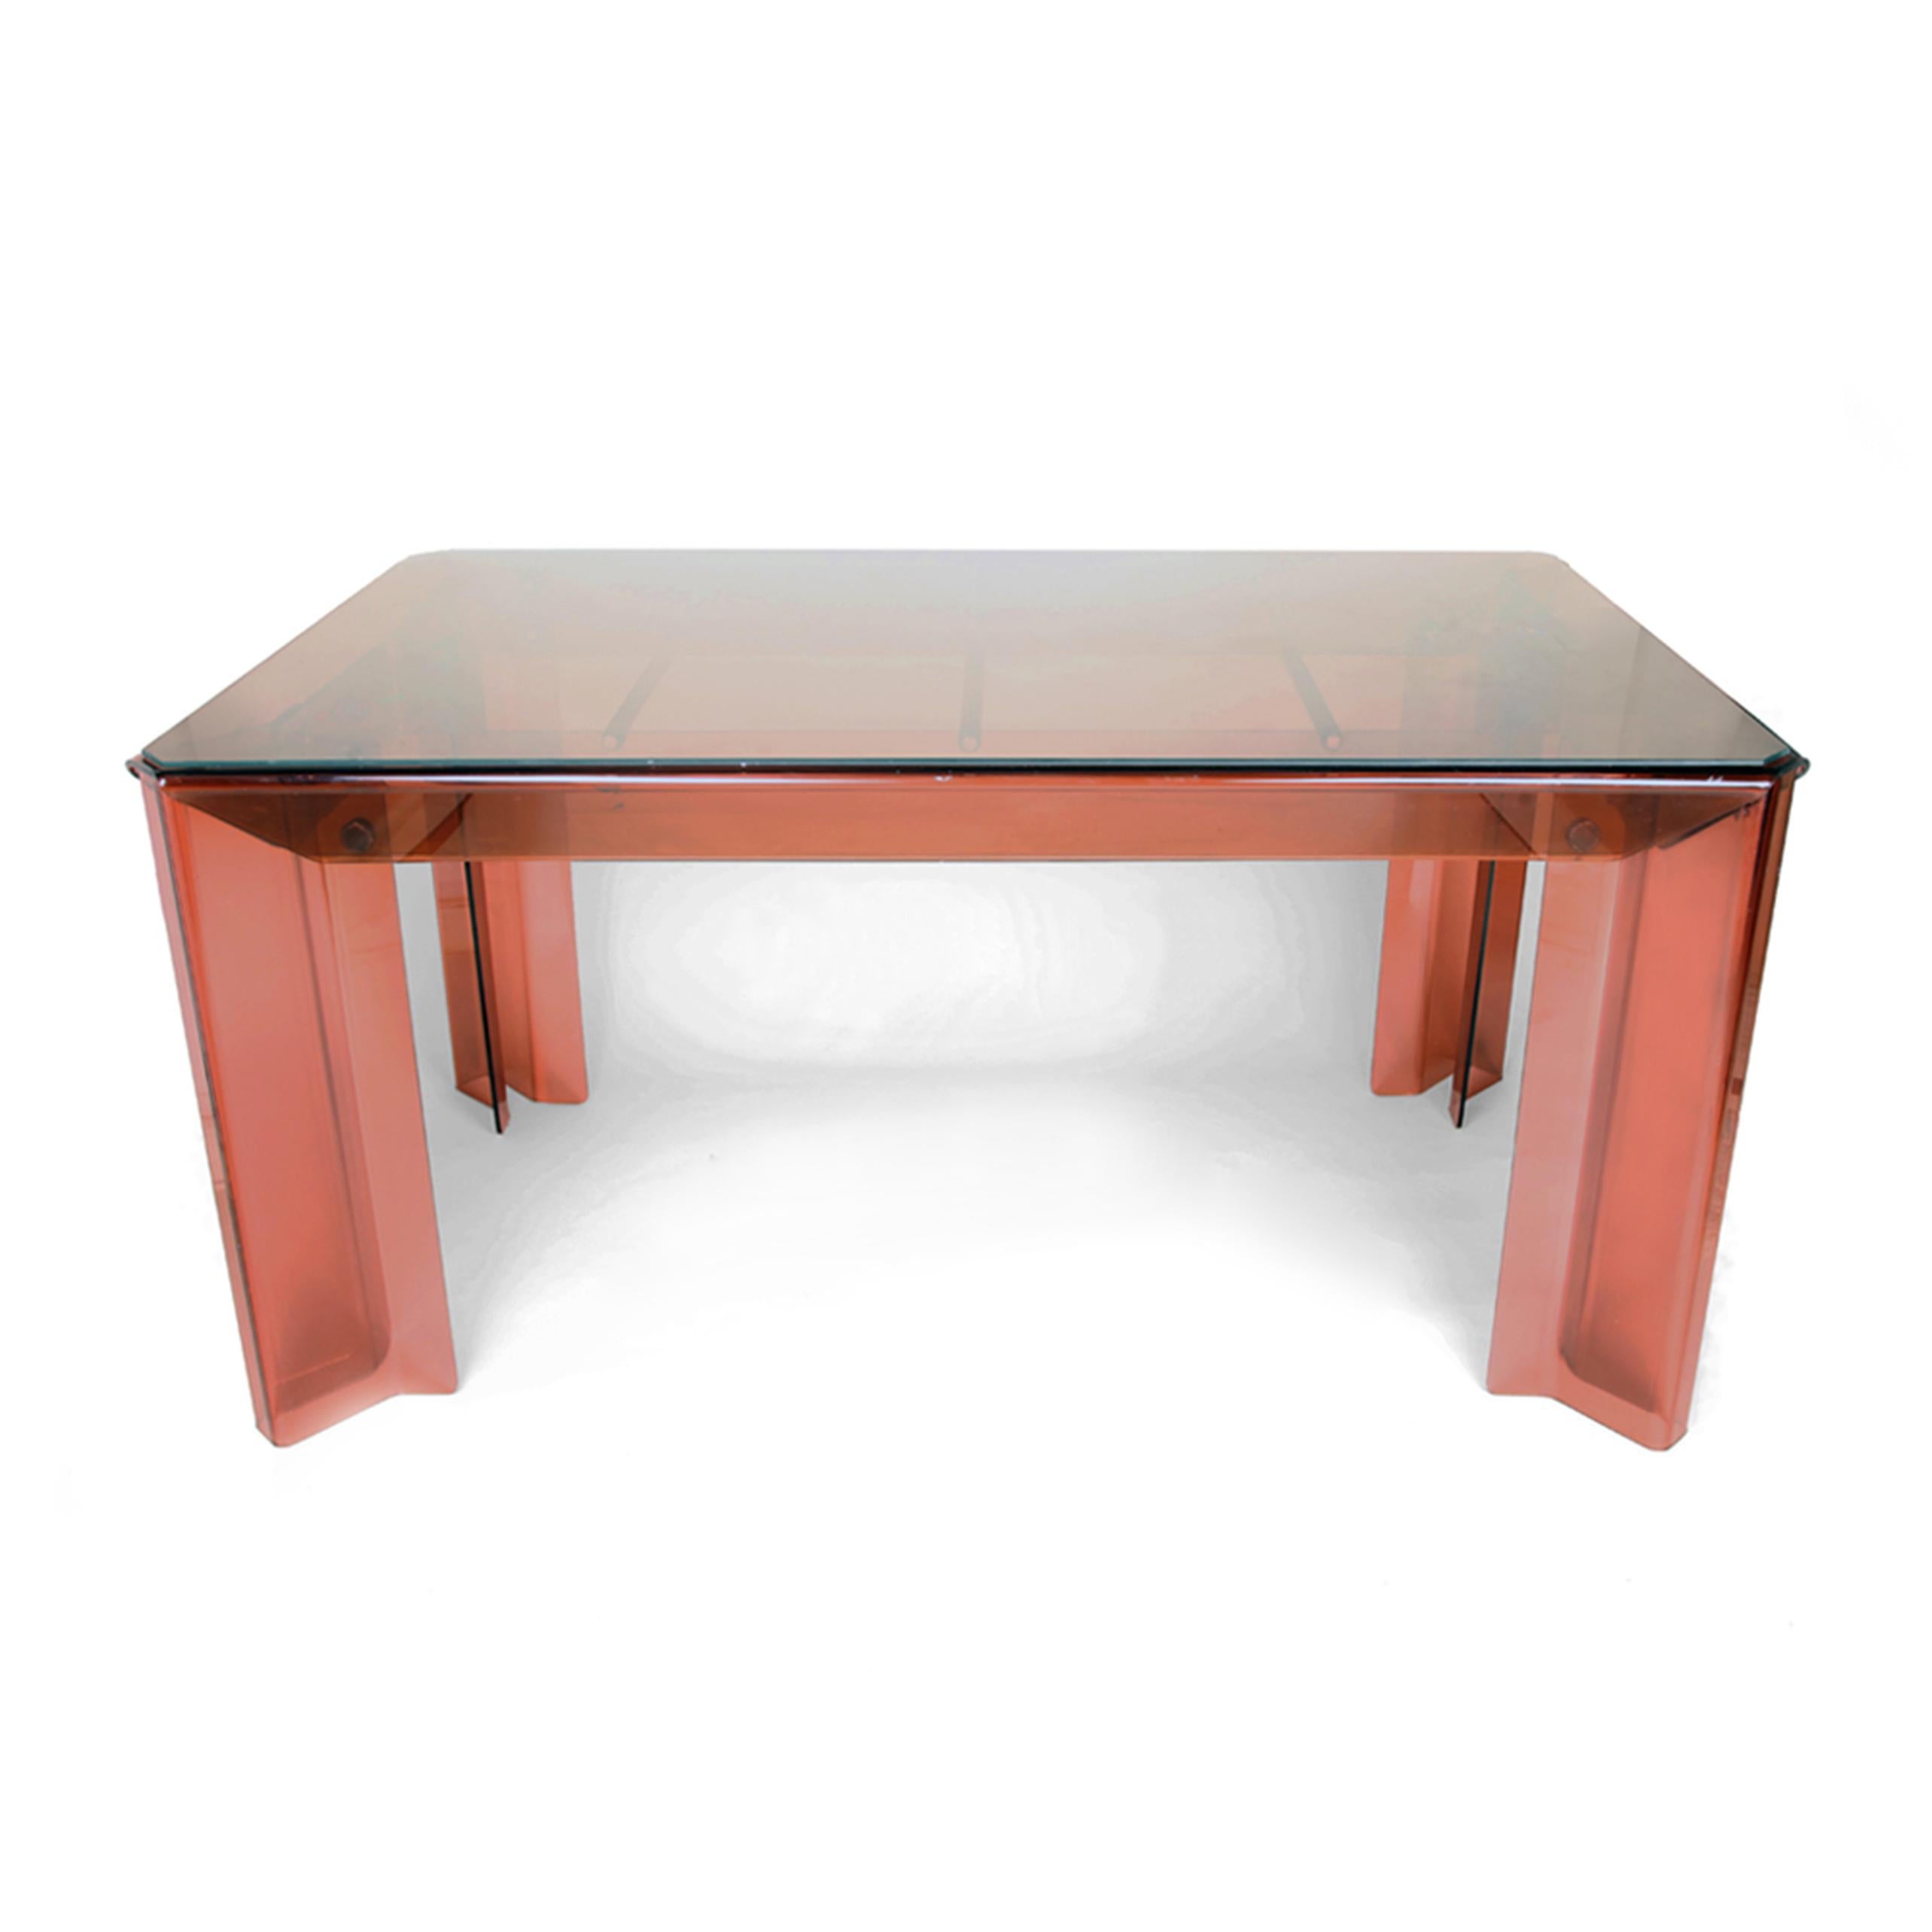 Unique dining table in smoked Perspex with chrome and orange Perspex fittings. Very modern design, the table has a glass top protective.

I recently found documentation which authenticates the original creator as Peter Banks of Banks Heeley